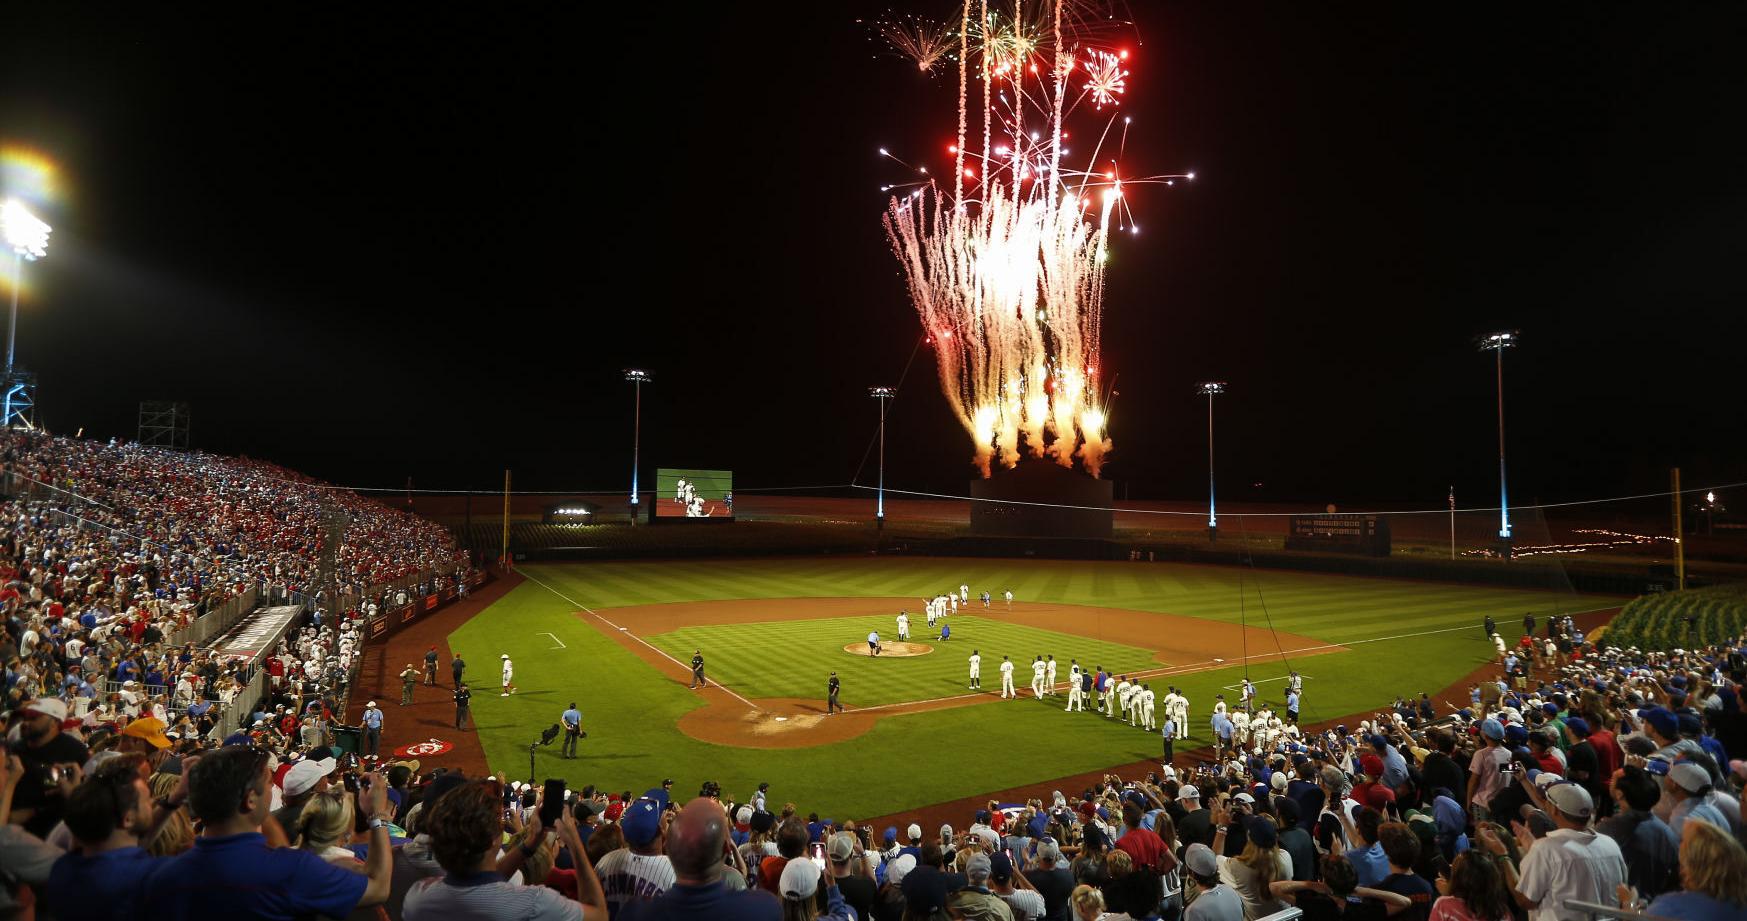 Organizers: 2022 Field of Dreams game bigger and better